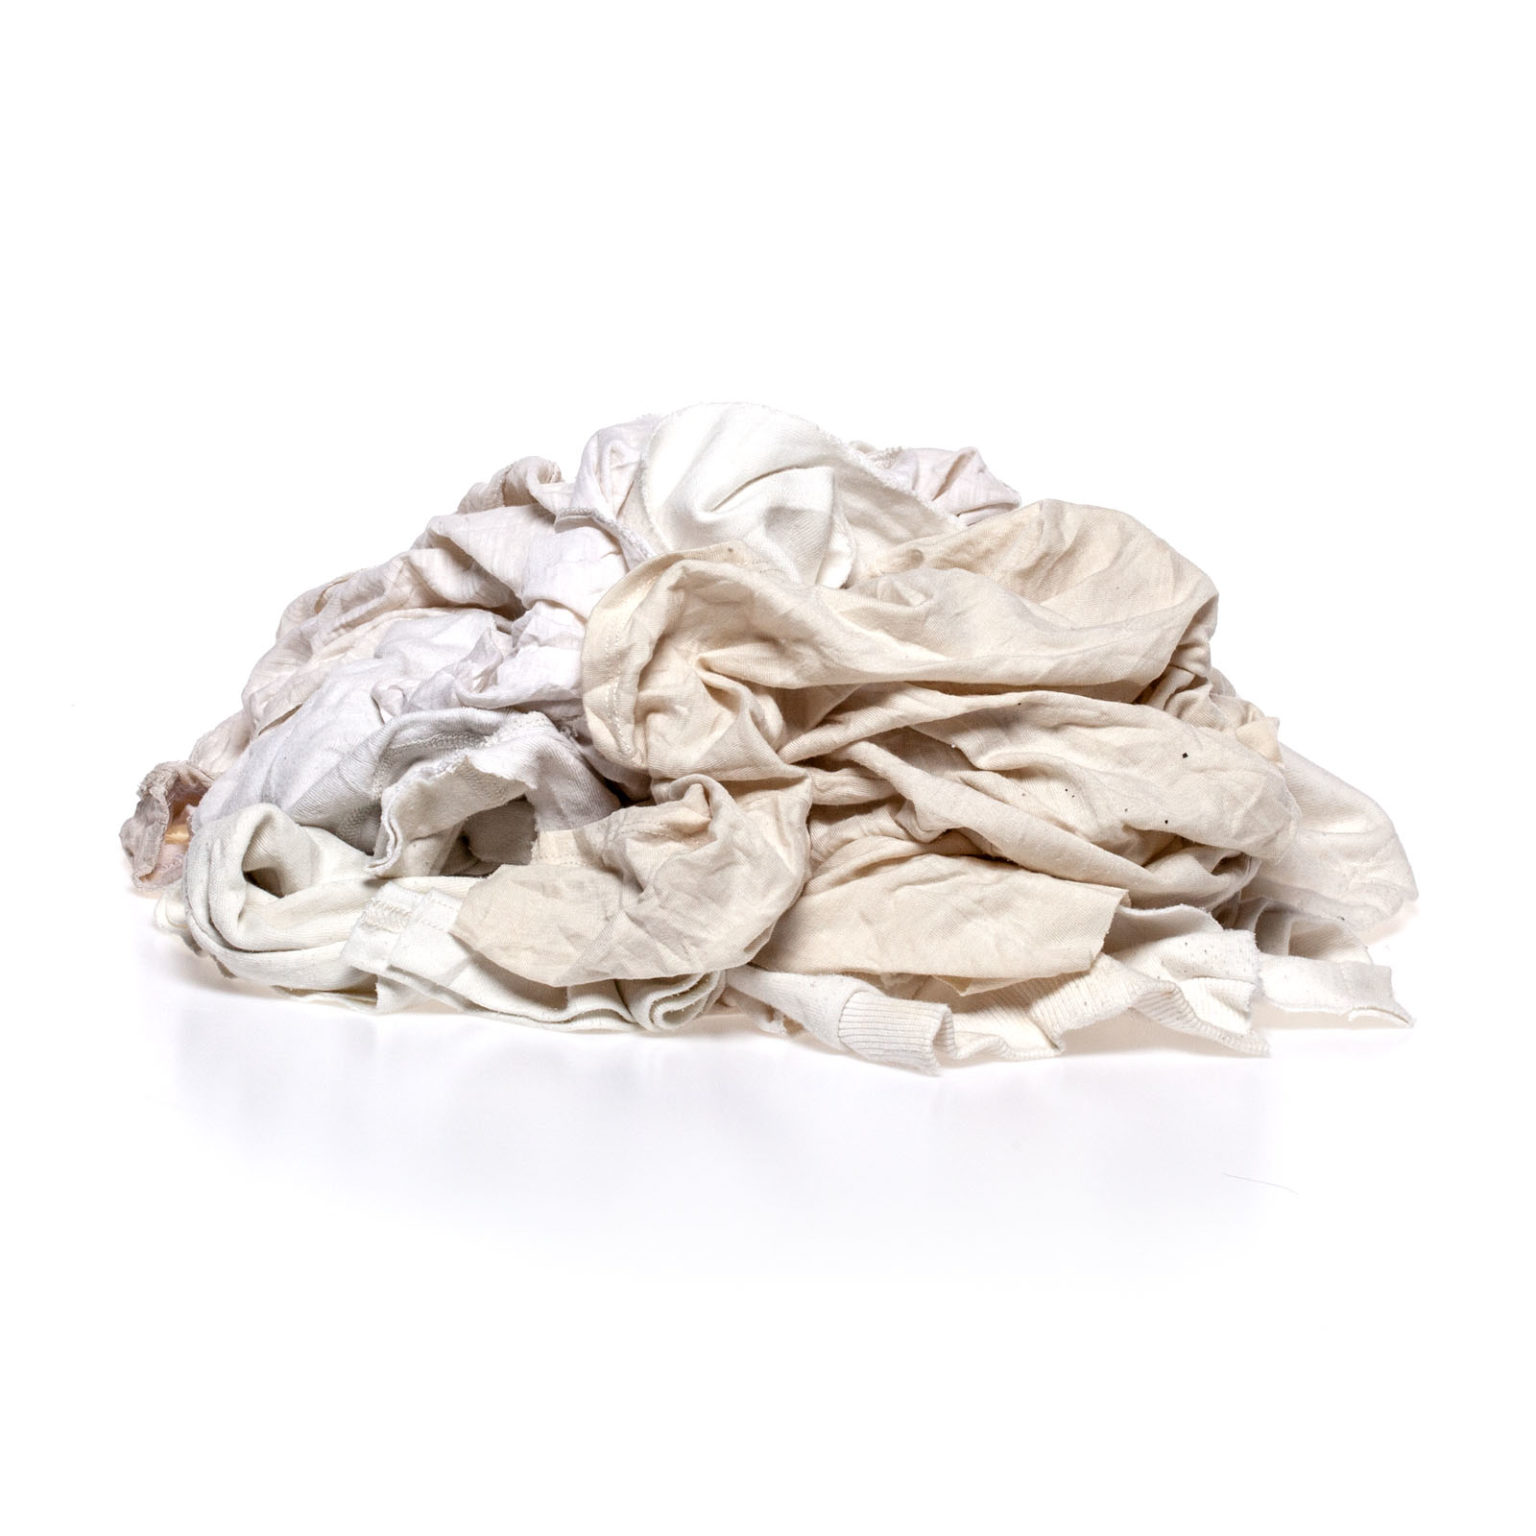 50 Pound Box of Rags | First Aid Supply Distributors & First Aid Supplies